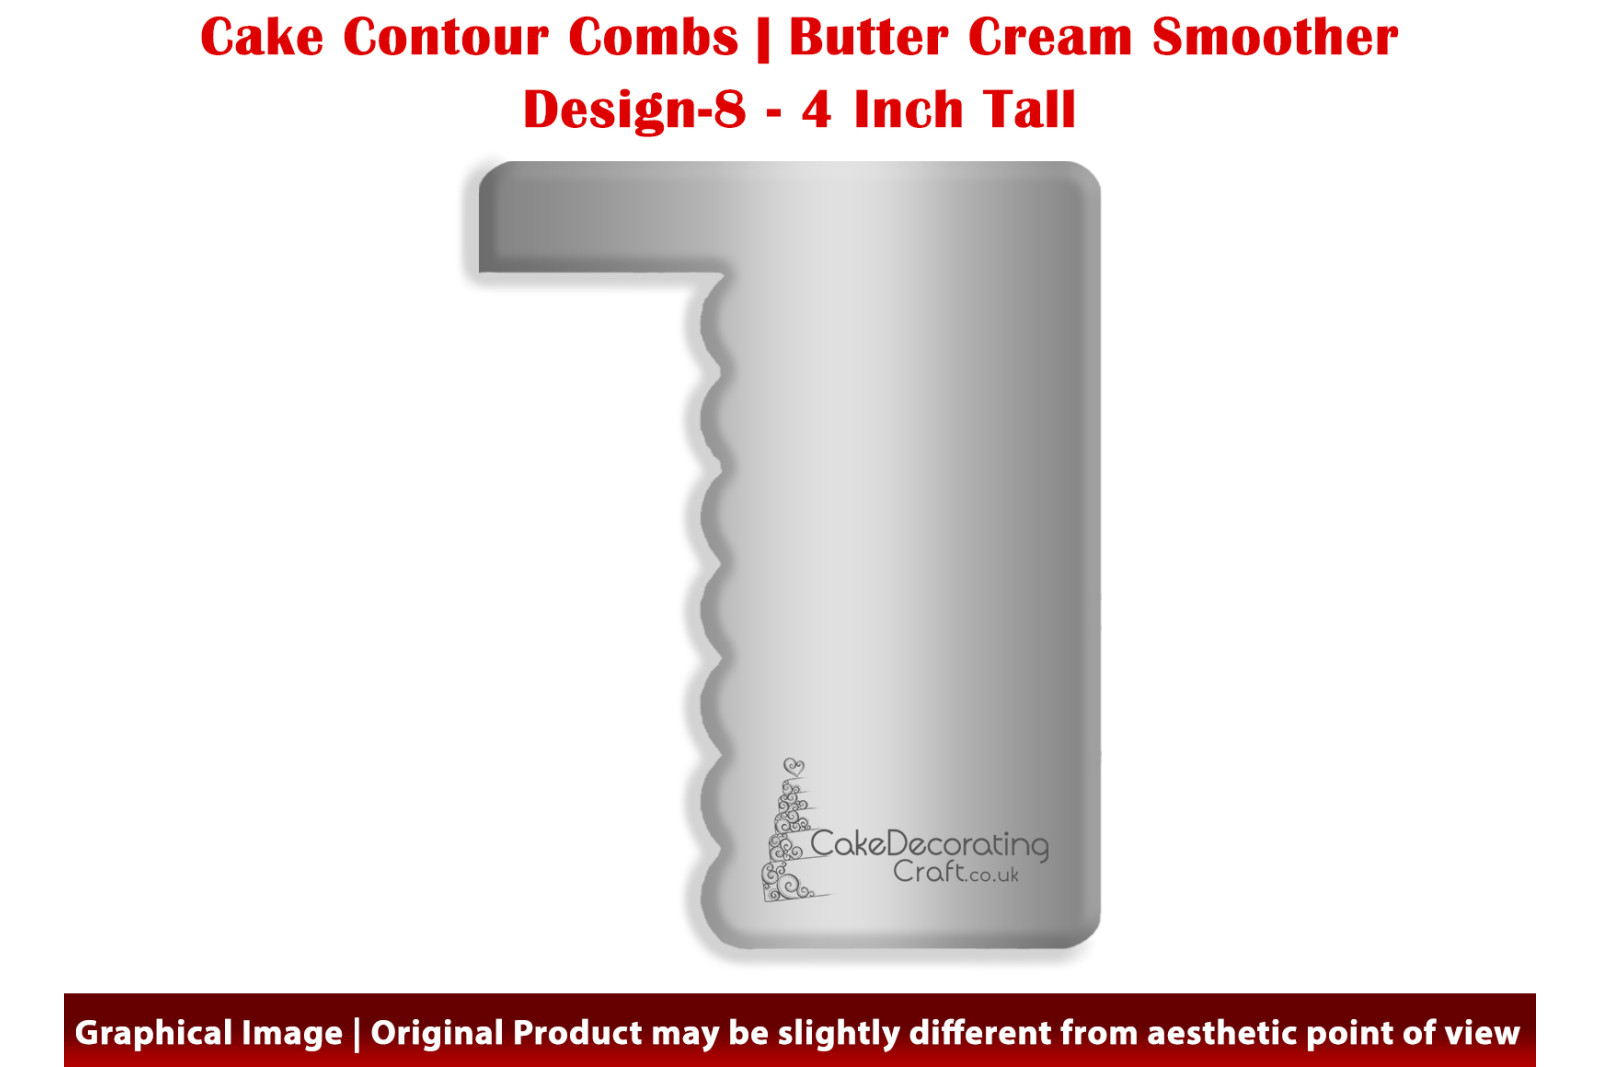 Fabulous Facets | Design 8 | 4 Inch | Cake Decorating Craft | Cake Contour Combs | Smoothing | Metal Spreader | Butter Cream Smoothing | Genius Tool